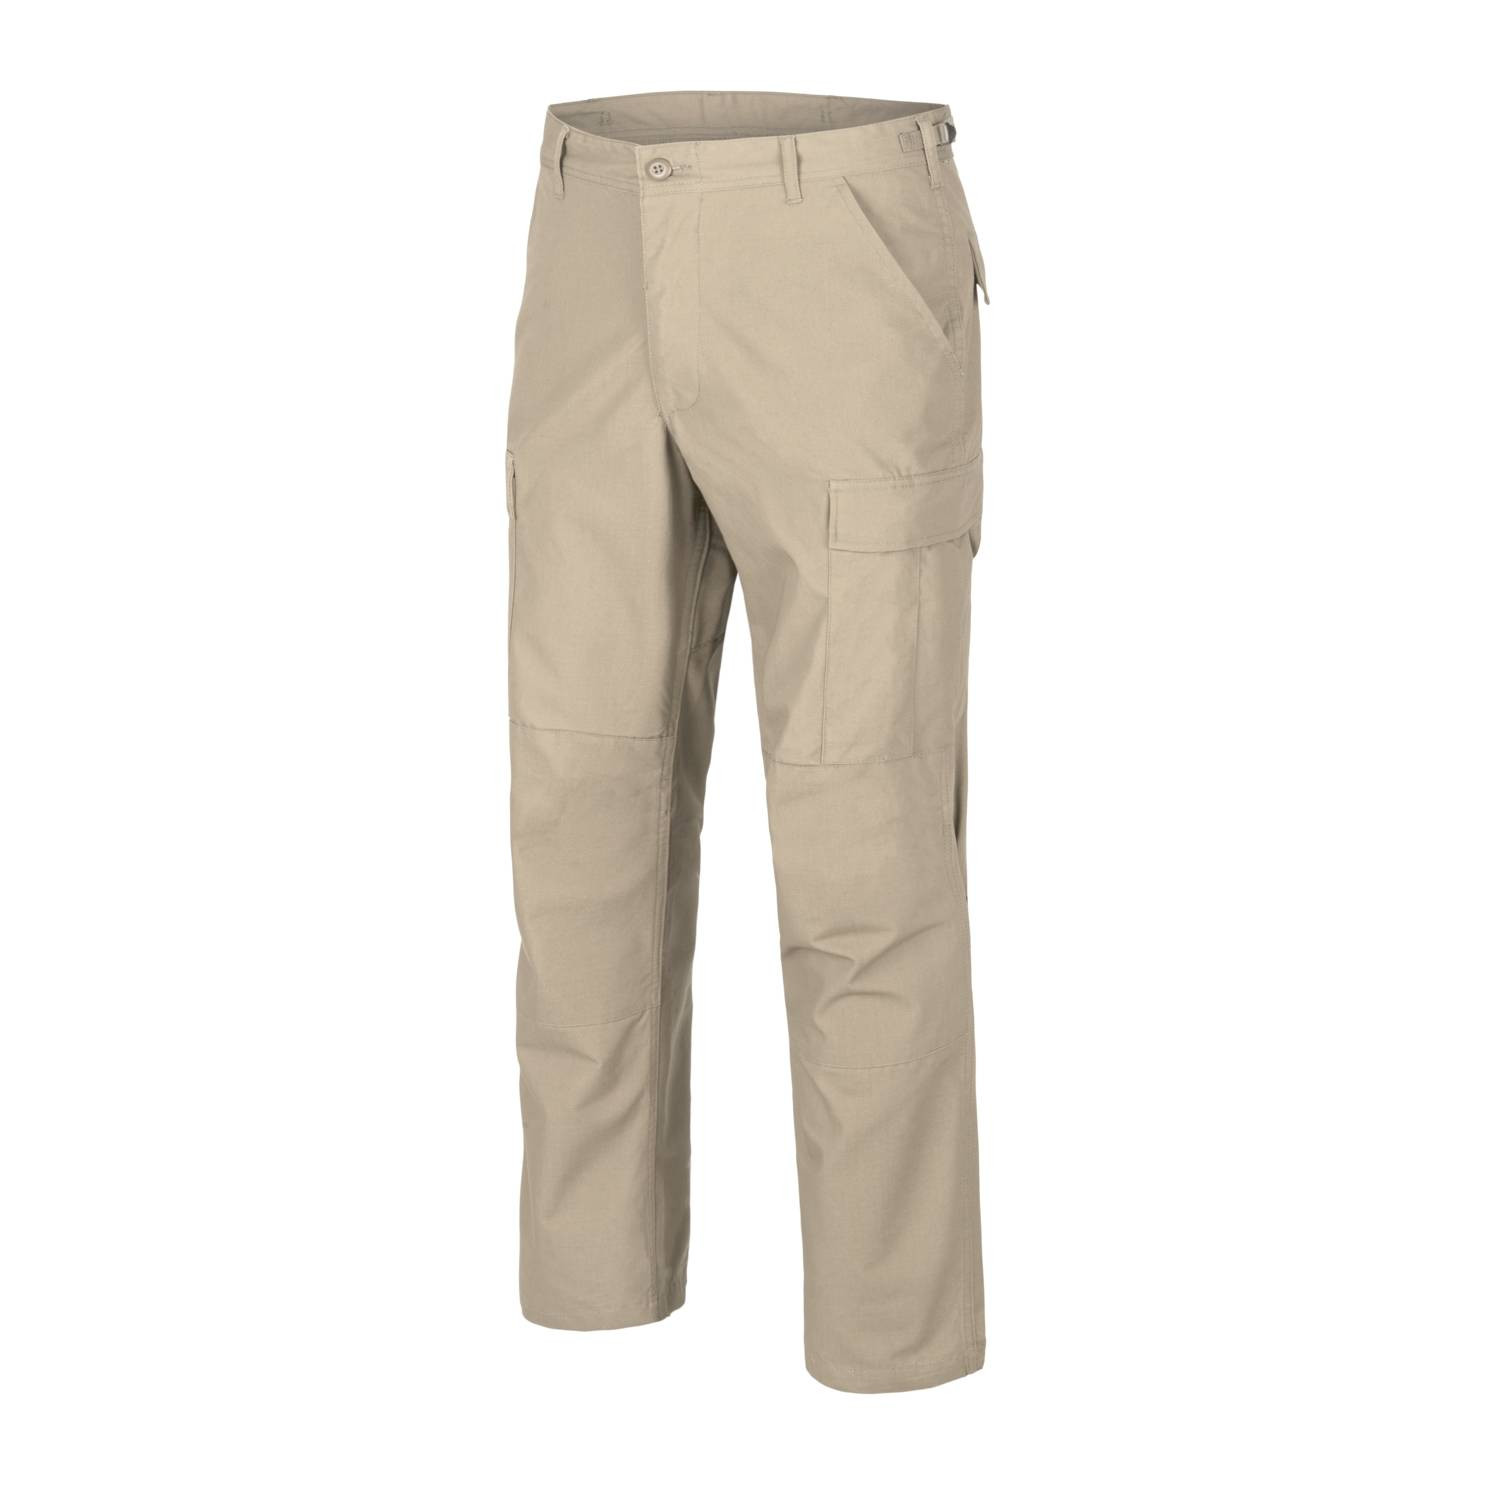 Propper Uniform: Tactical BDU Pants 65/35 Rip Stop Charcoal Grey – Army  Navy Now